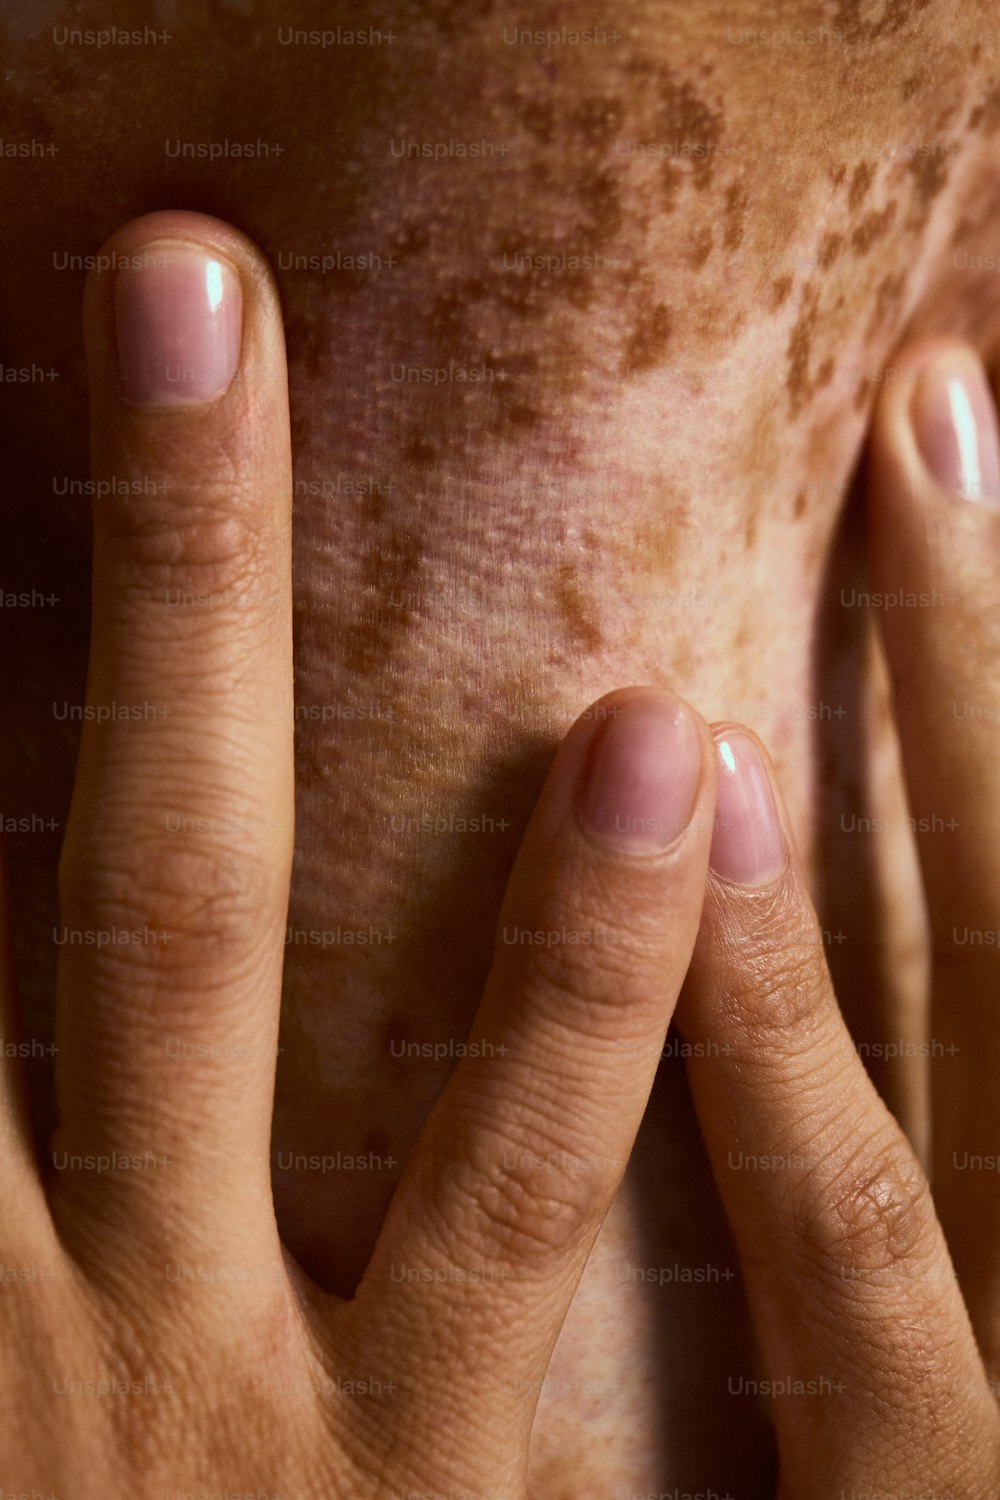 a close up of a person's hands holding a piece of skin